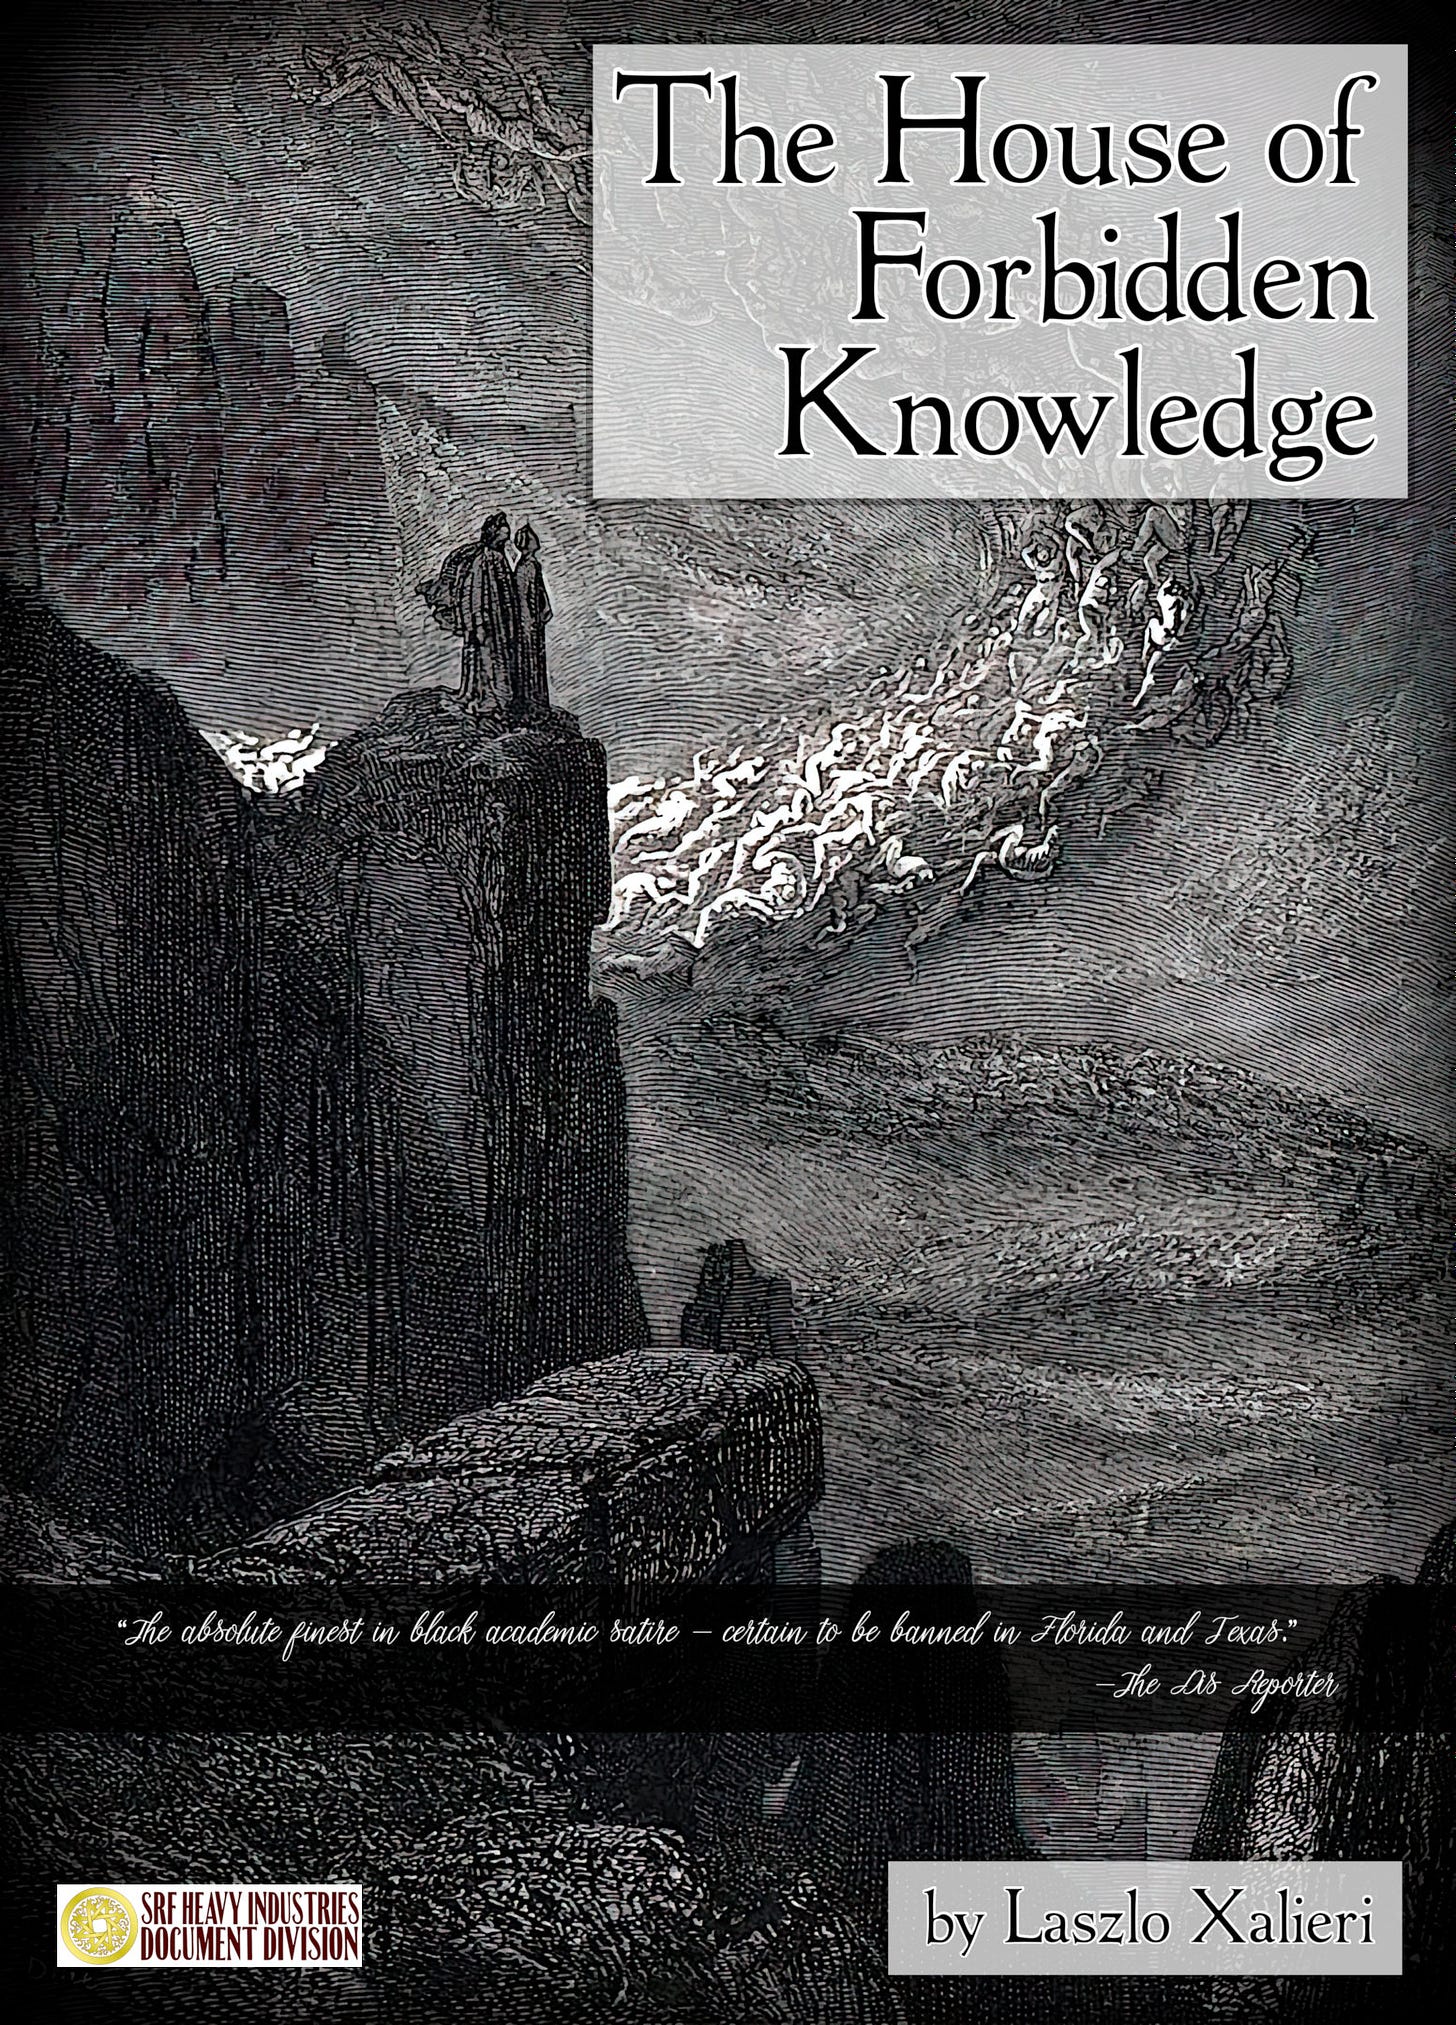 The House of Forbidden Knowledge e-book edition cover featuring familiar work by Gustave Dore for Dante's Inferno